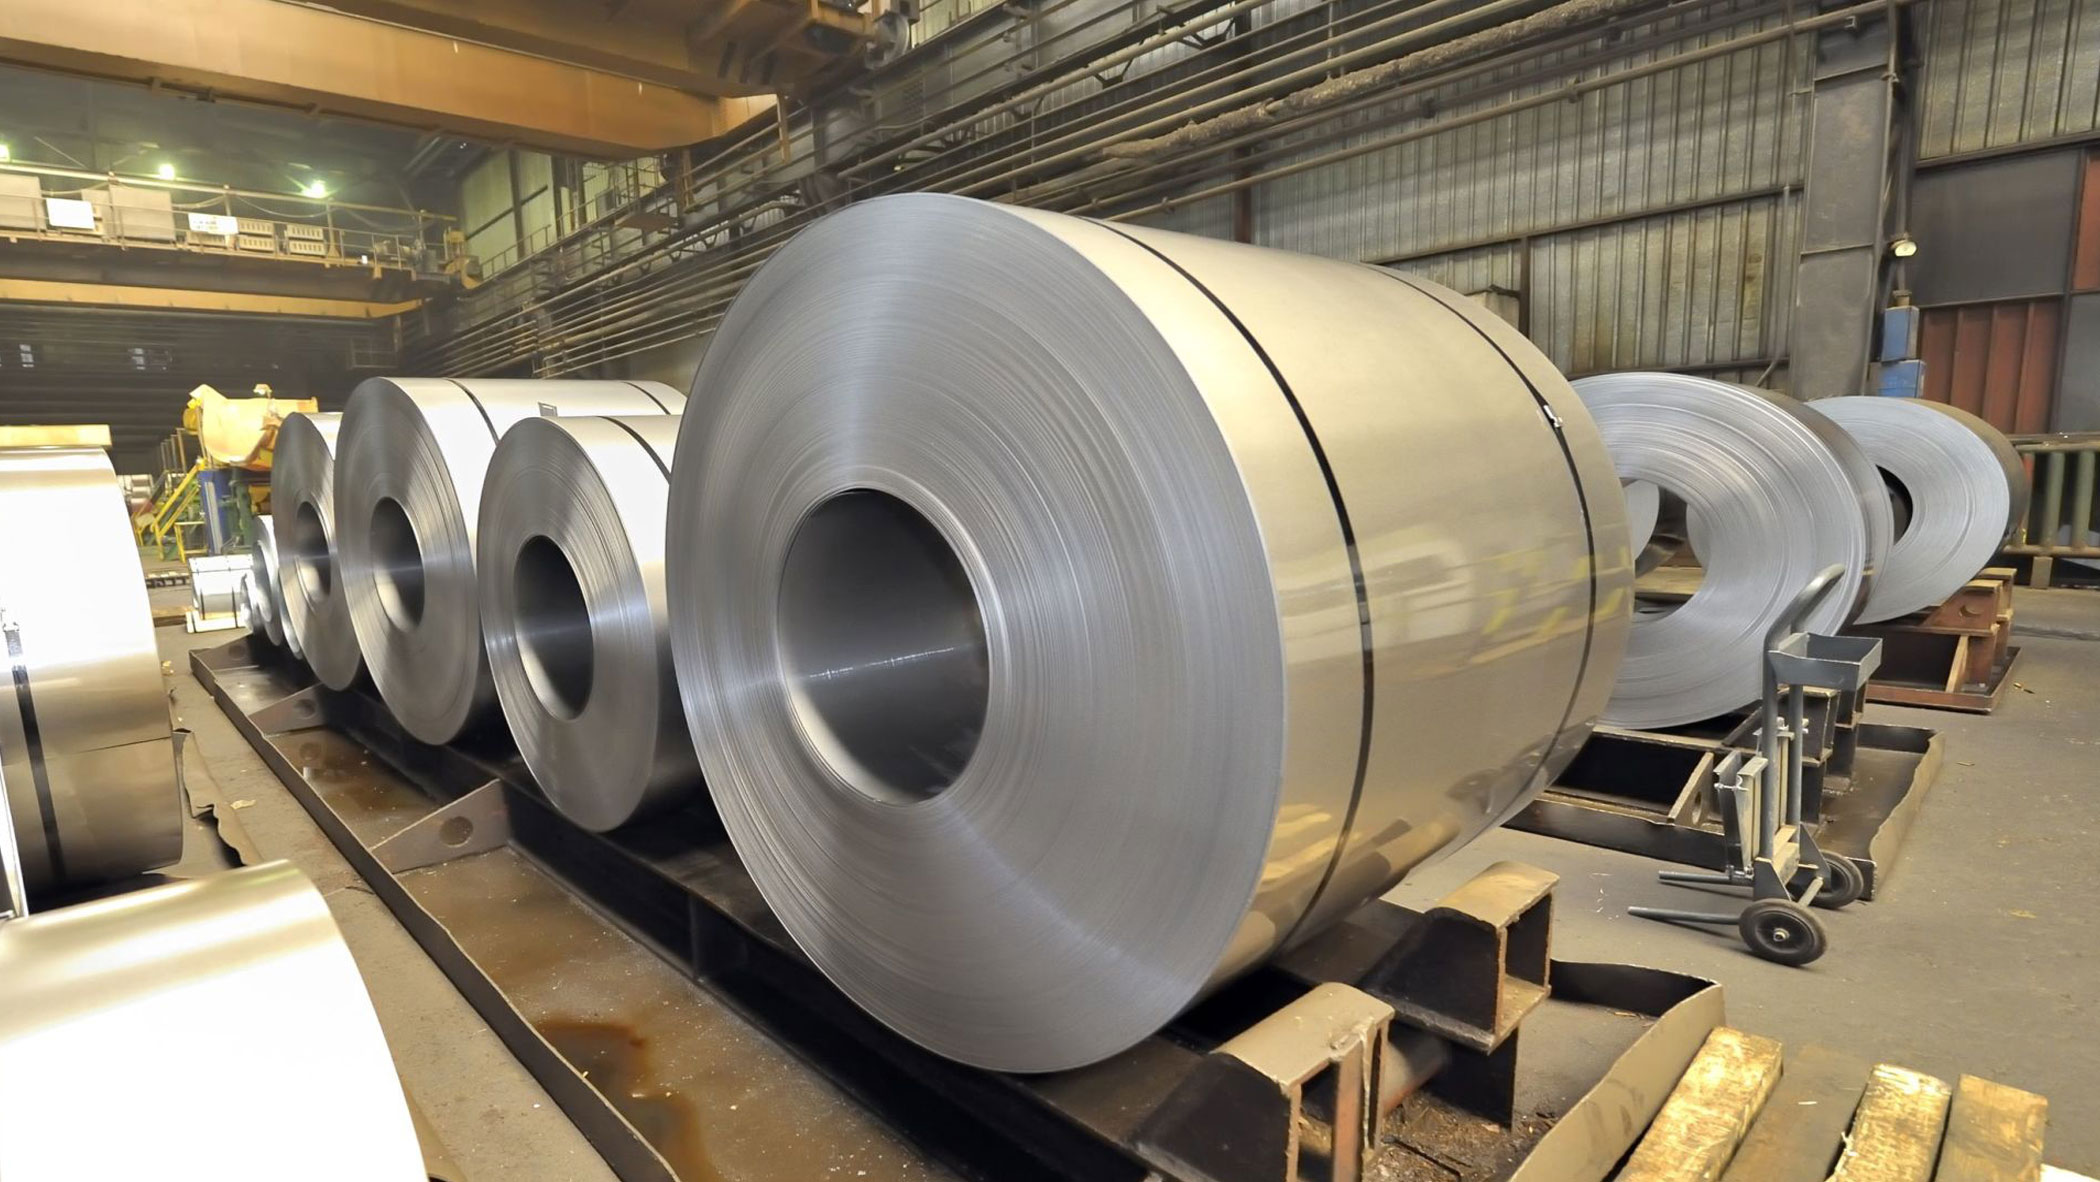 Giant steel coils sitting in a line in a warehouse